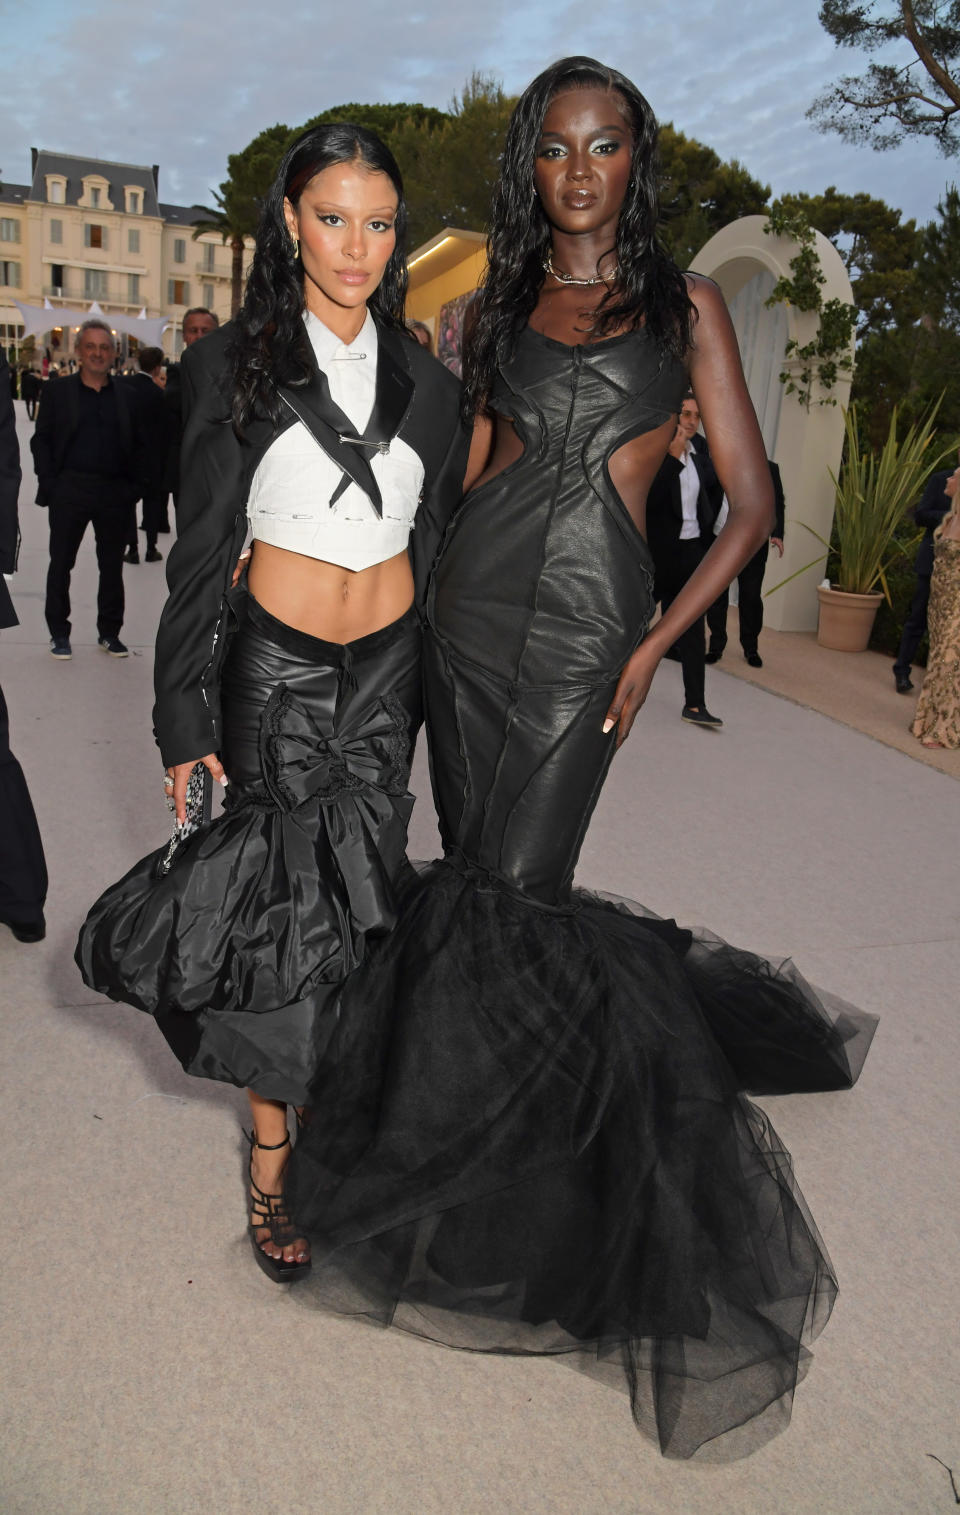 CAP D'ANTIBES, FRANCE - MAY 26: Sami Miro and Duckie Thot attend the amfAR Gala Cannes 2022 at the Hotel du Cap-Eden-Roc on May 26, 2022 in Cap d'Antibes, Côte d'Azur. (Photo by Dave Benett/amfAR/Dave Benett/Getty Images)